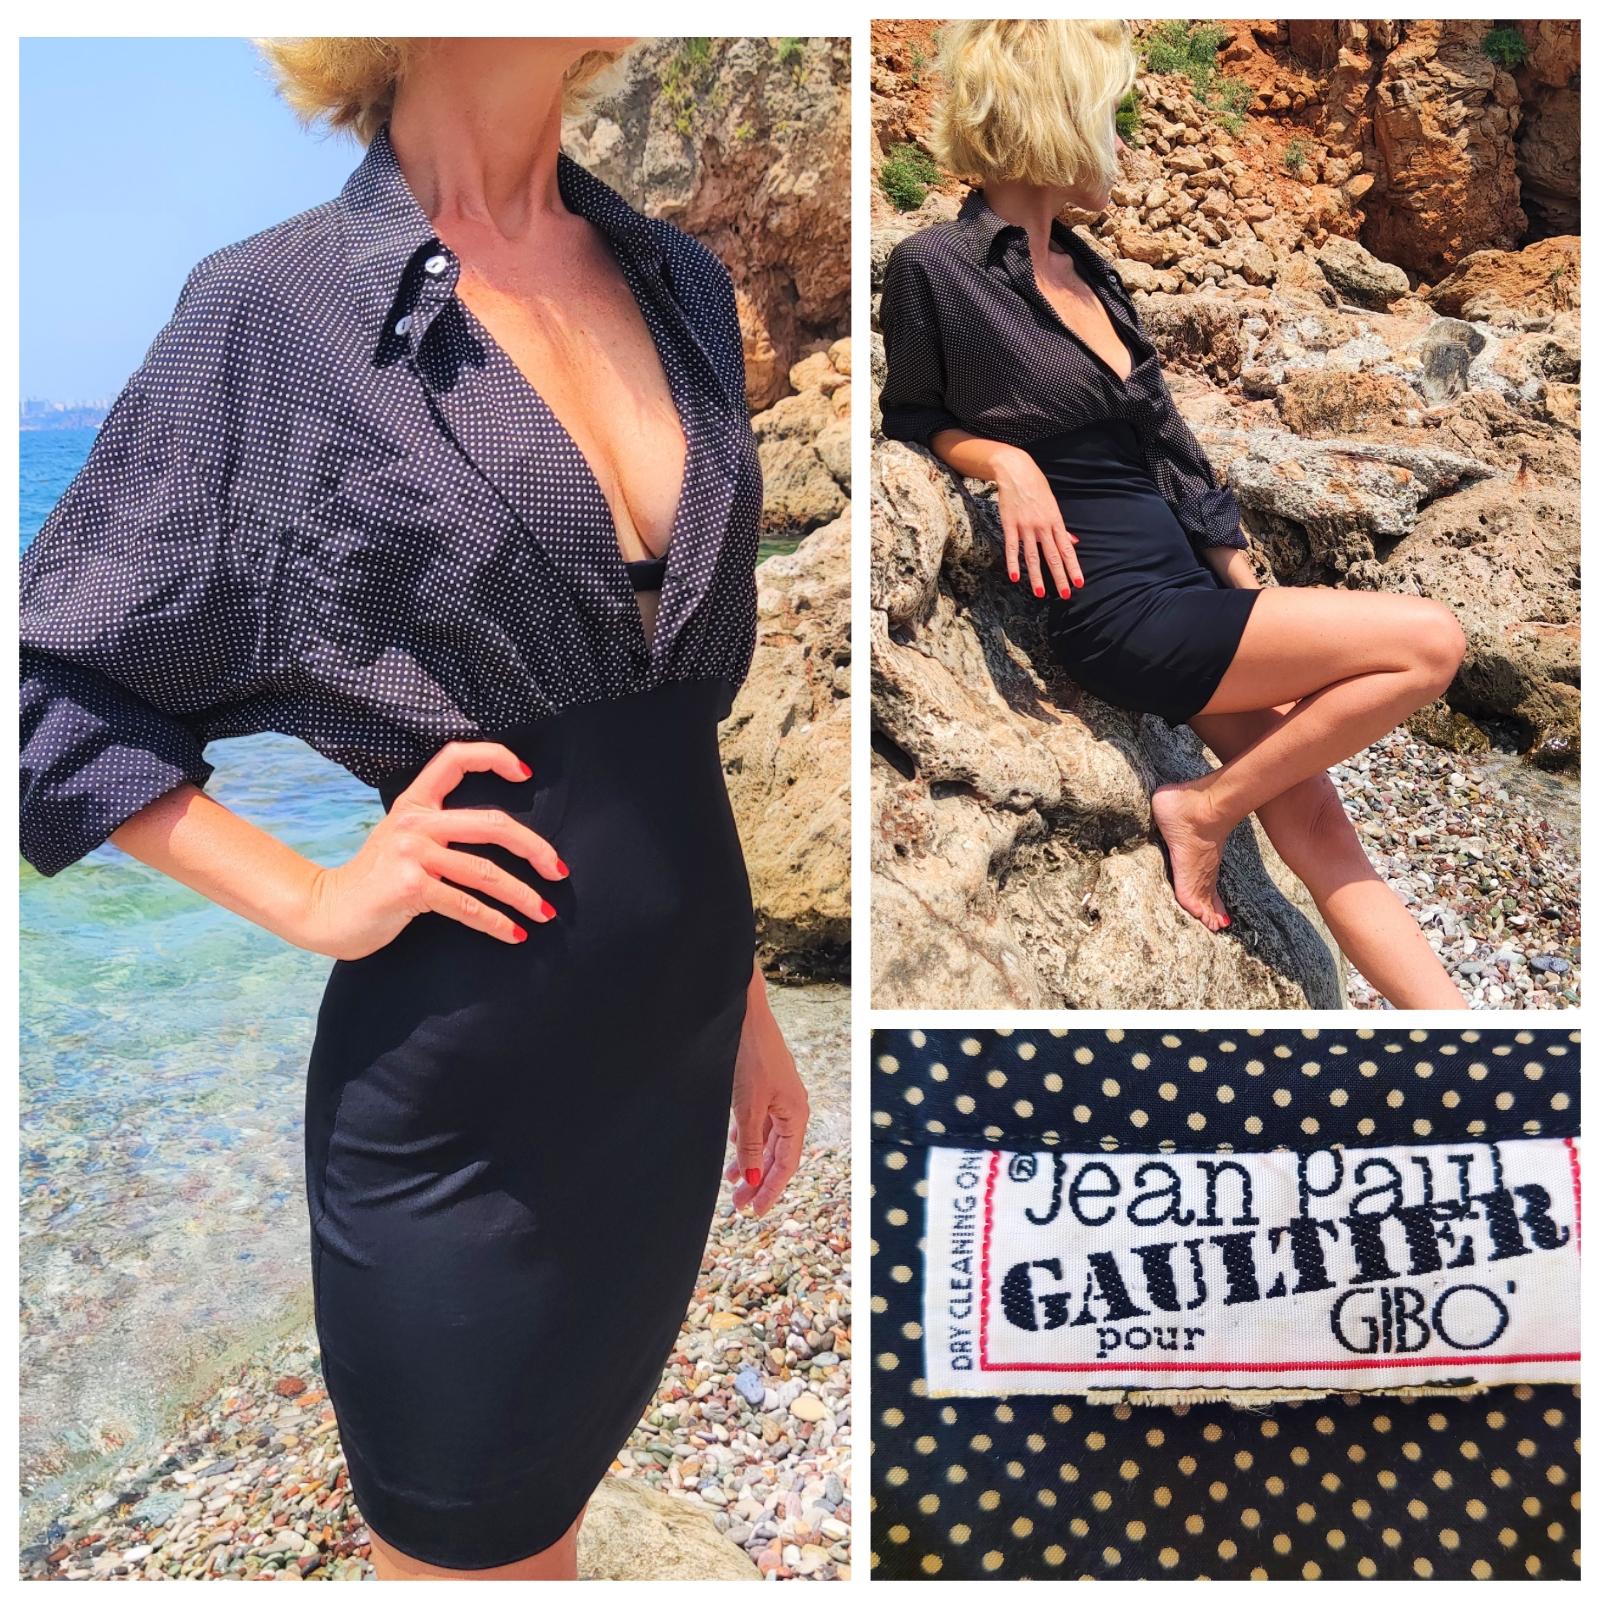 Formal dress by Jean Paul Gaultier!
From the early Gautlier`s era, 80s!


VERY GOOD condition! 

SIZE
Fits from XS to medium.
No size label. Model`s size in photos: XS.

Length: 84 cm /33.1 inch
Armpit to armpit: 44 cm / 17.3 inch
Waist: 29 cm /